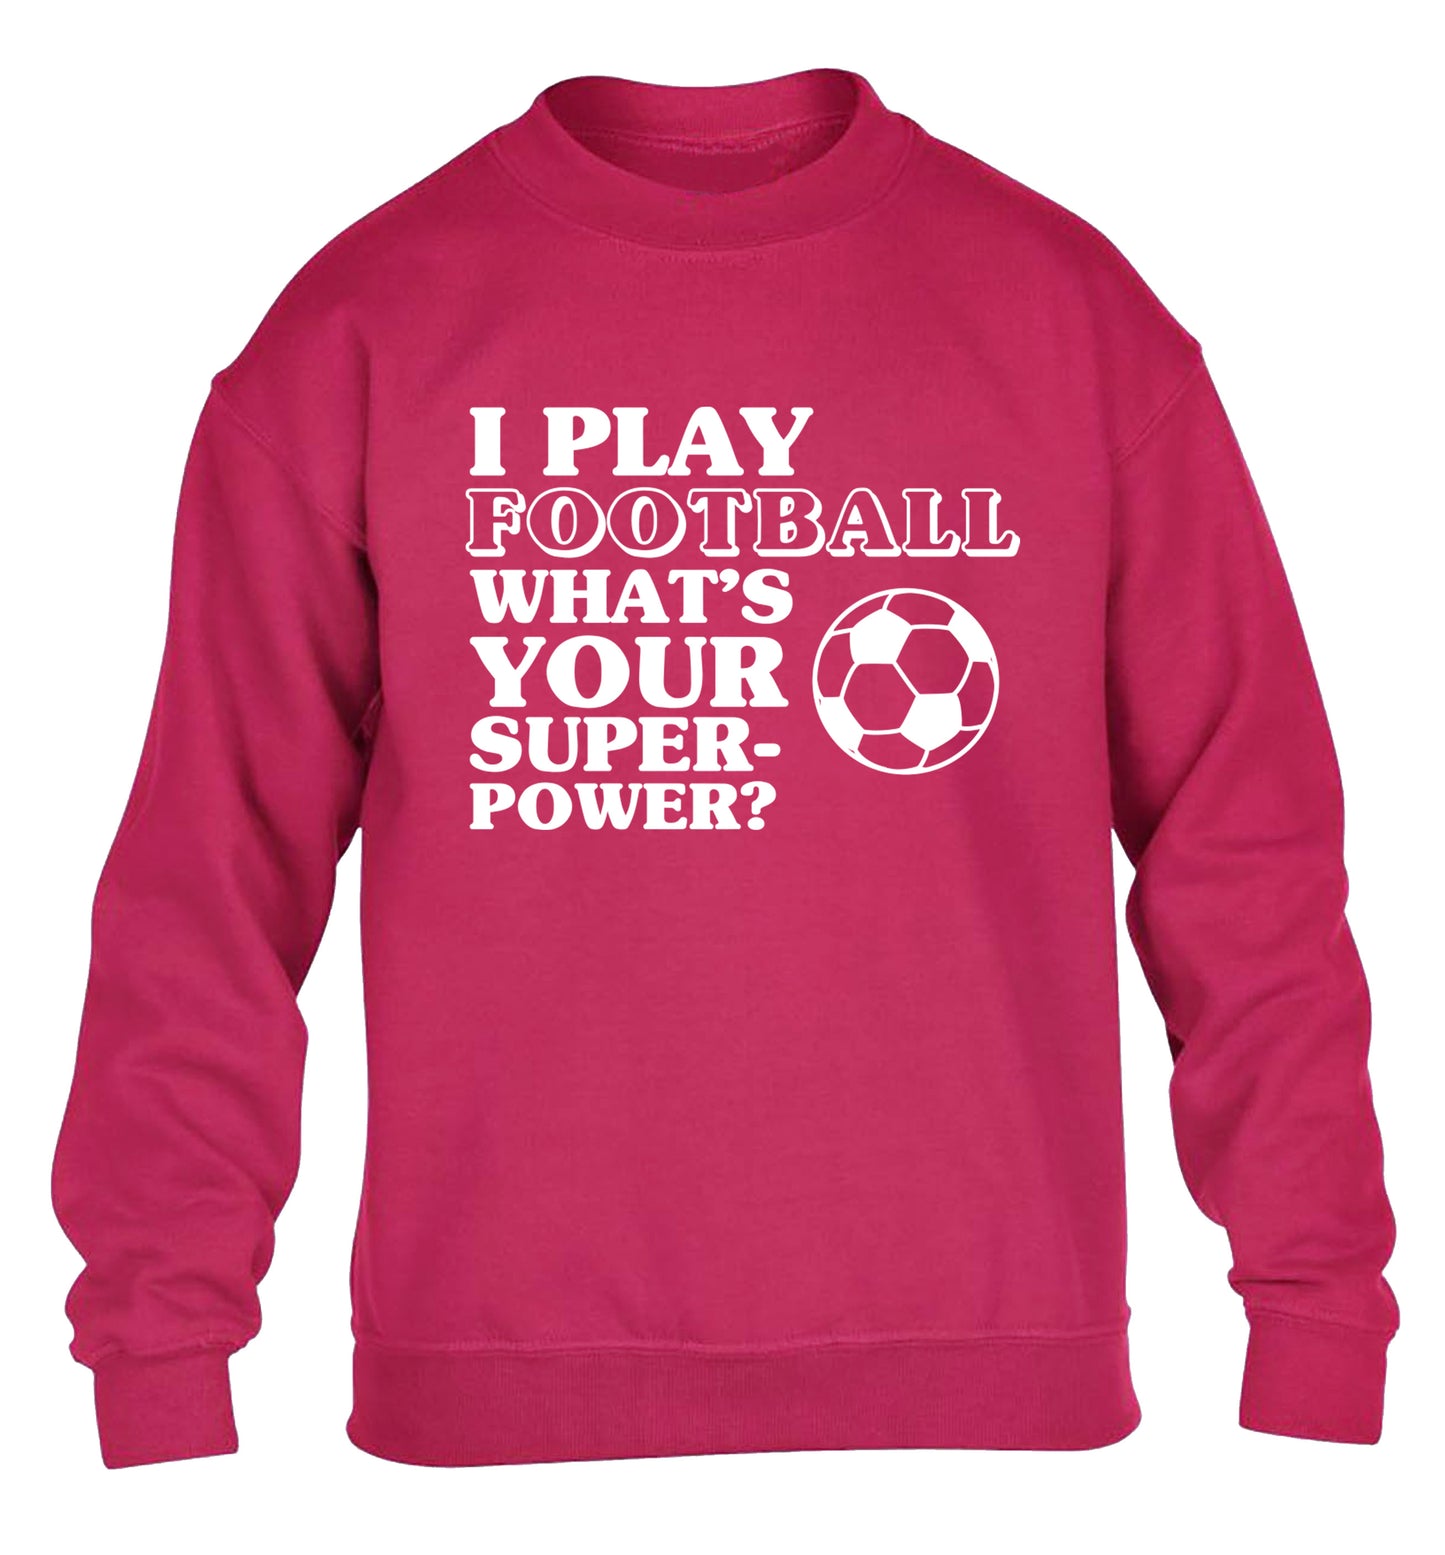 I play football what's your superpower? children's pink sweater 12-14 Years